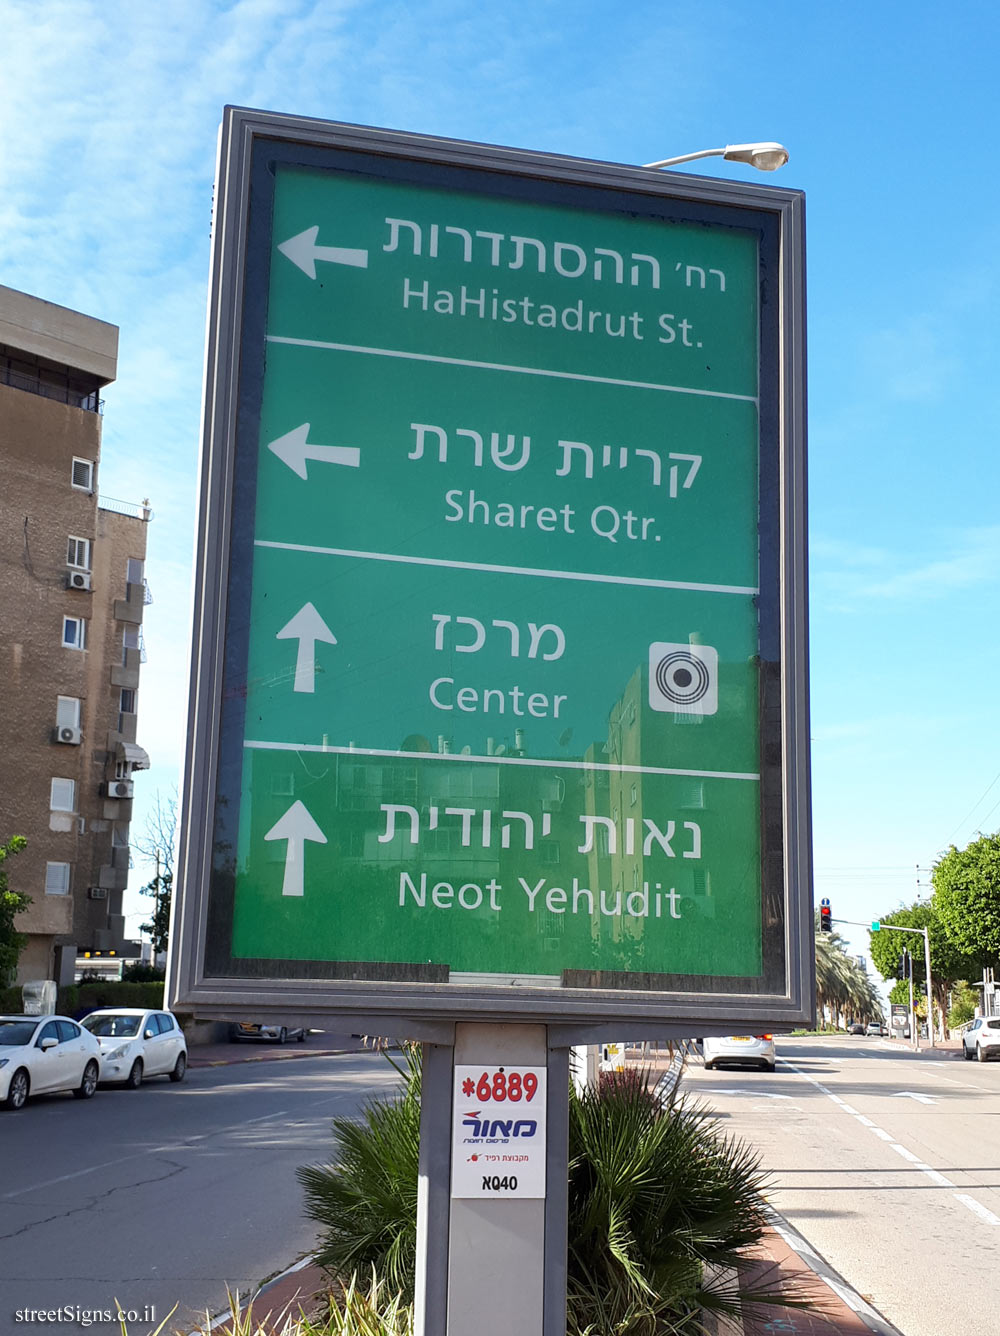 Holon - A direction sign for streets and neighborhoods in the city